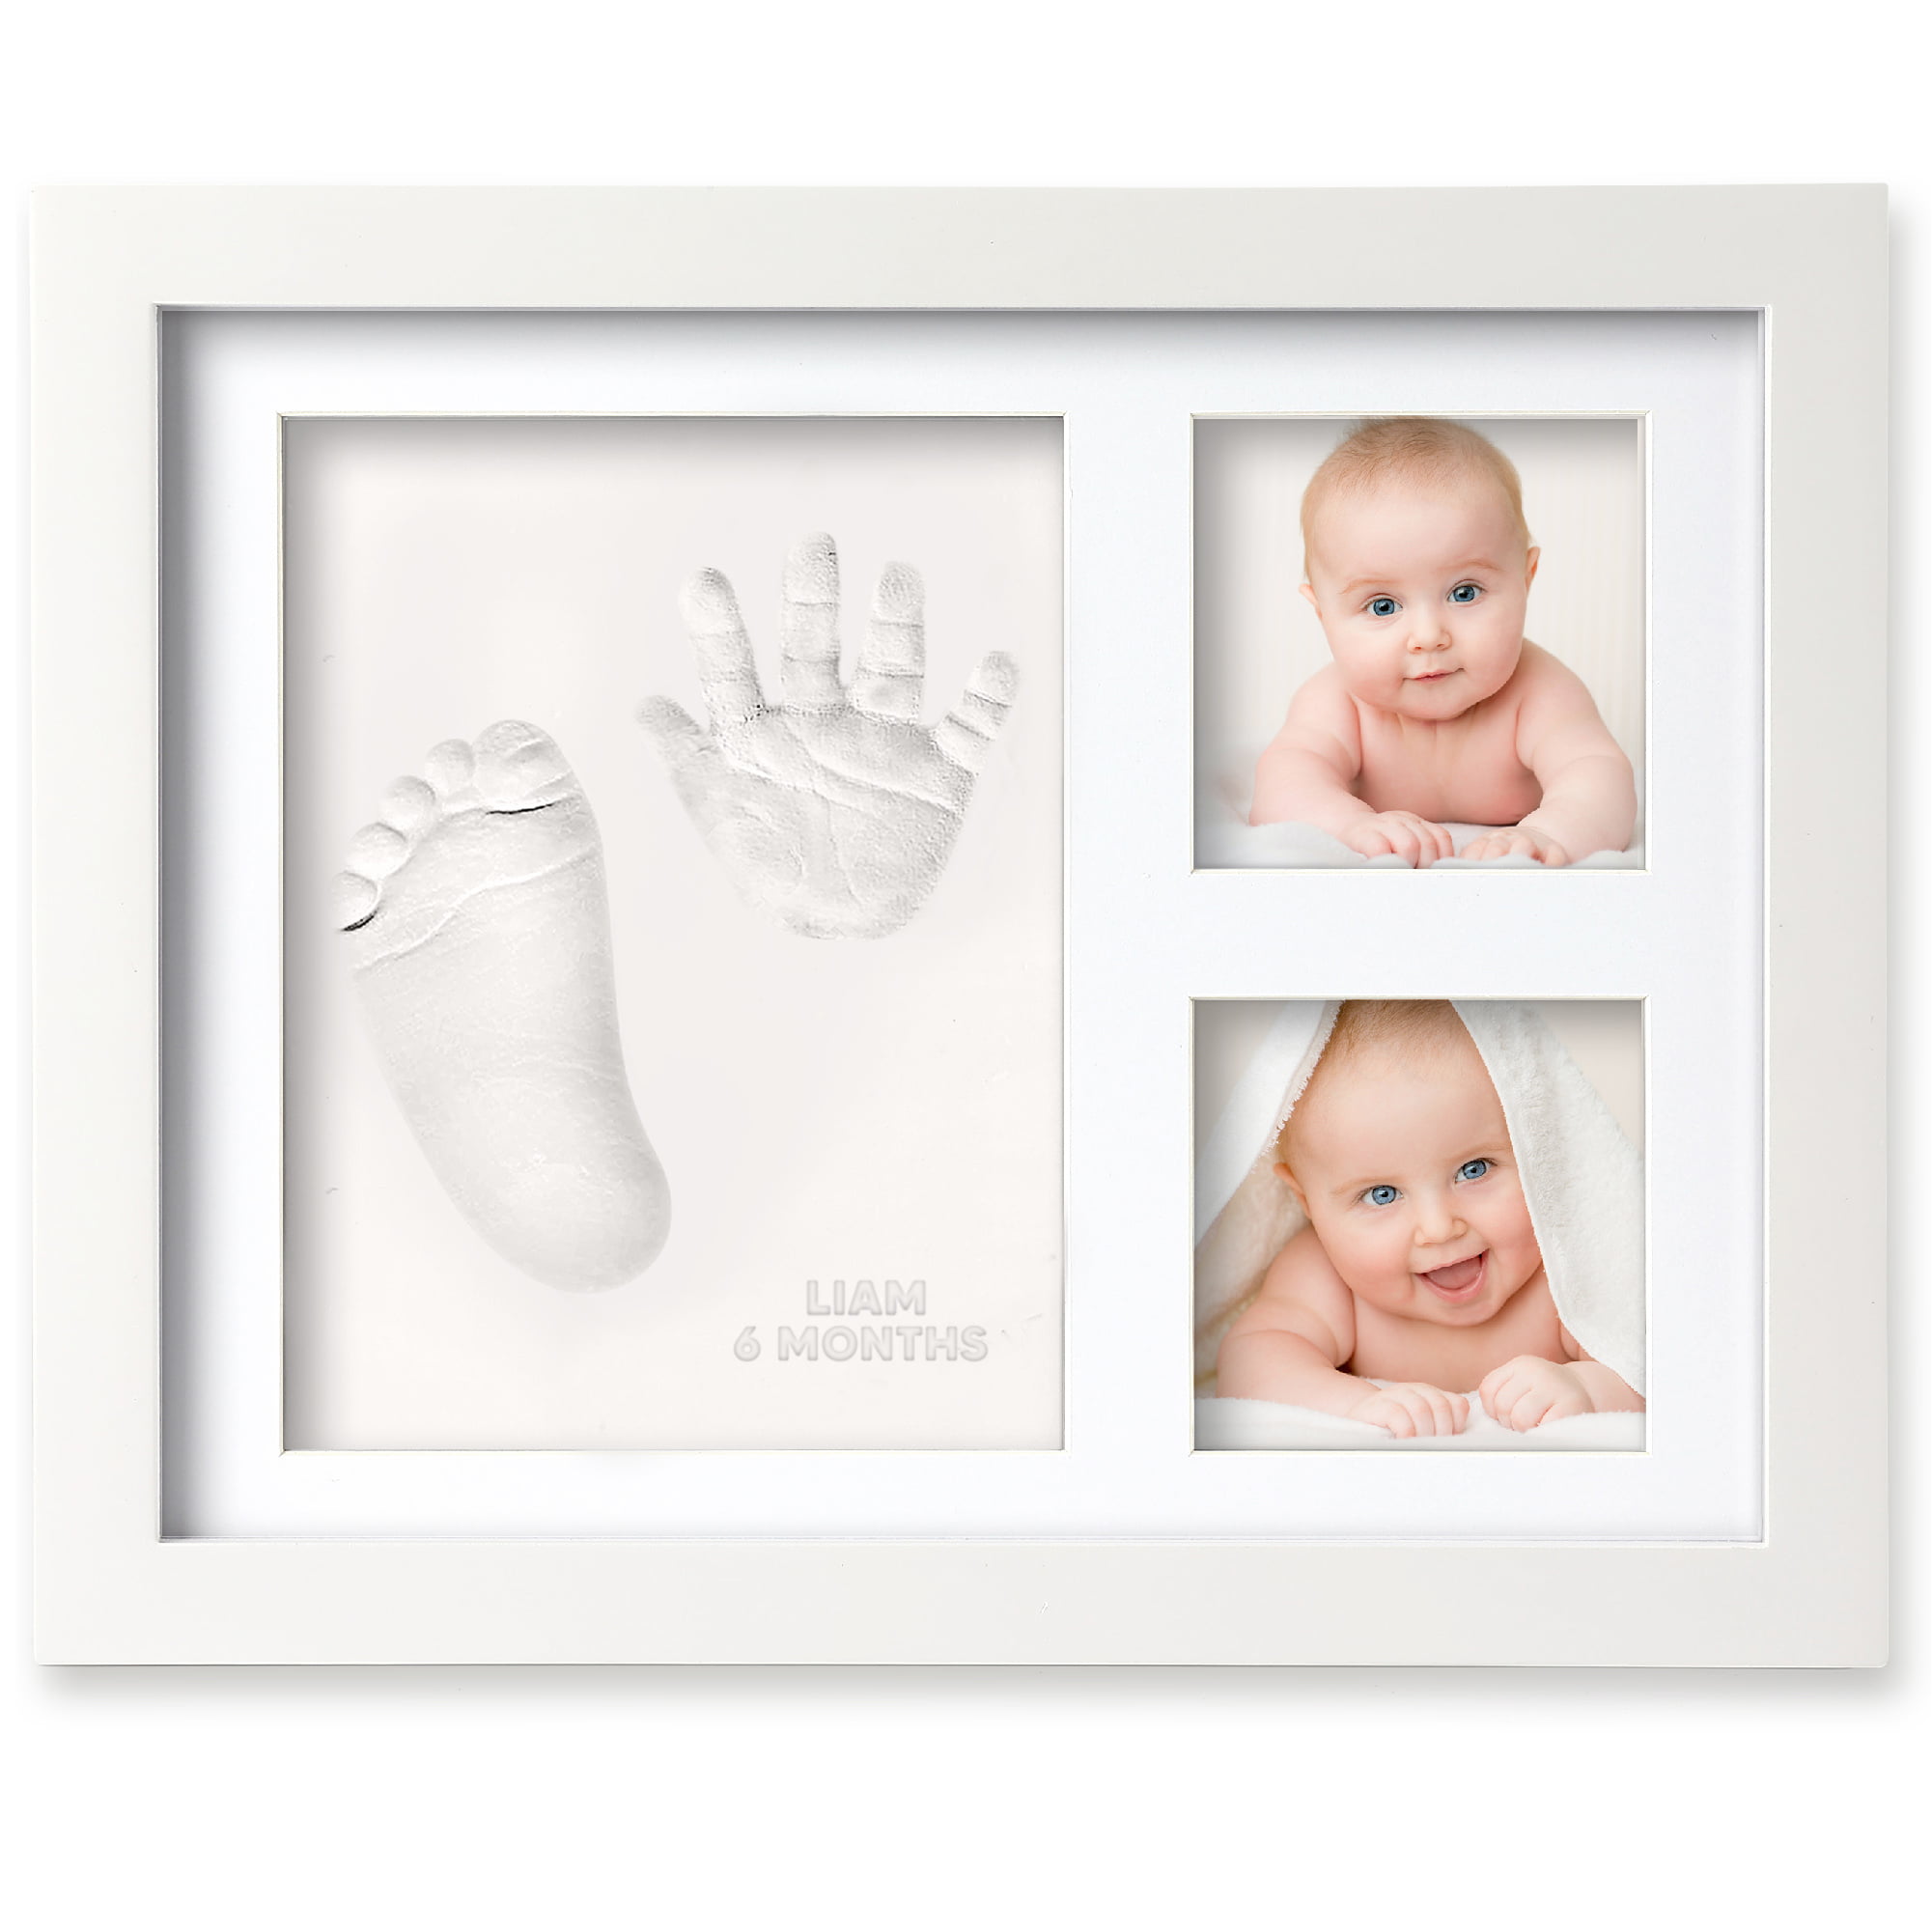 capture baby‘s hand and footprints with photo Gift2 Baby Print Kit Wooden Pack 